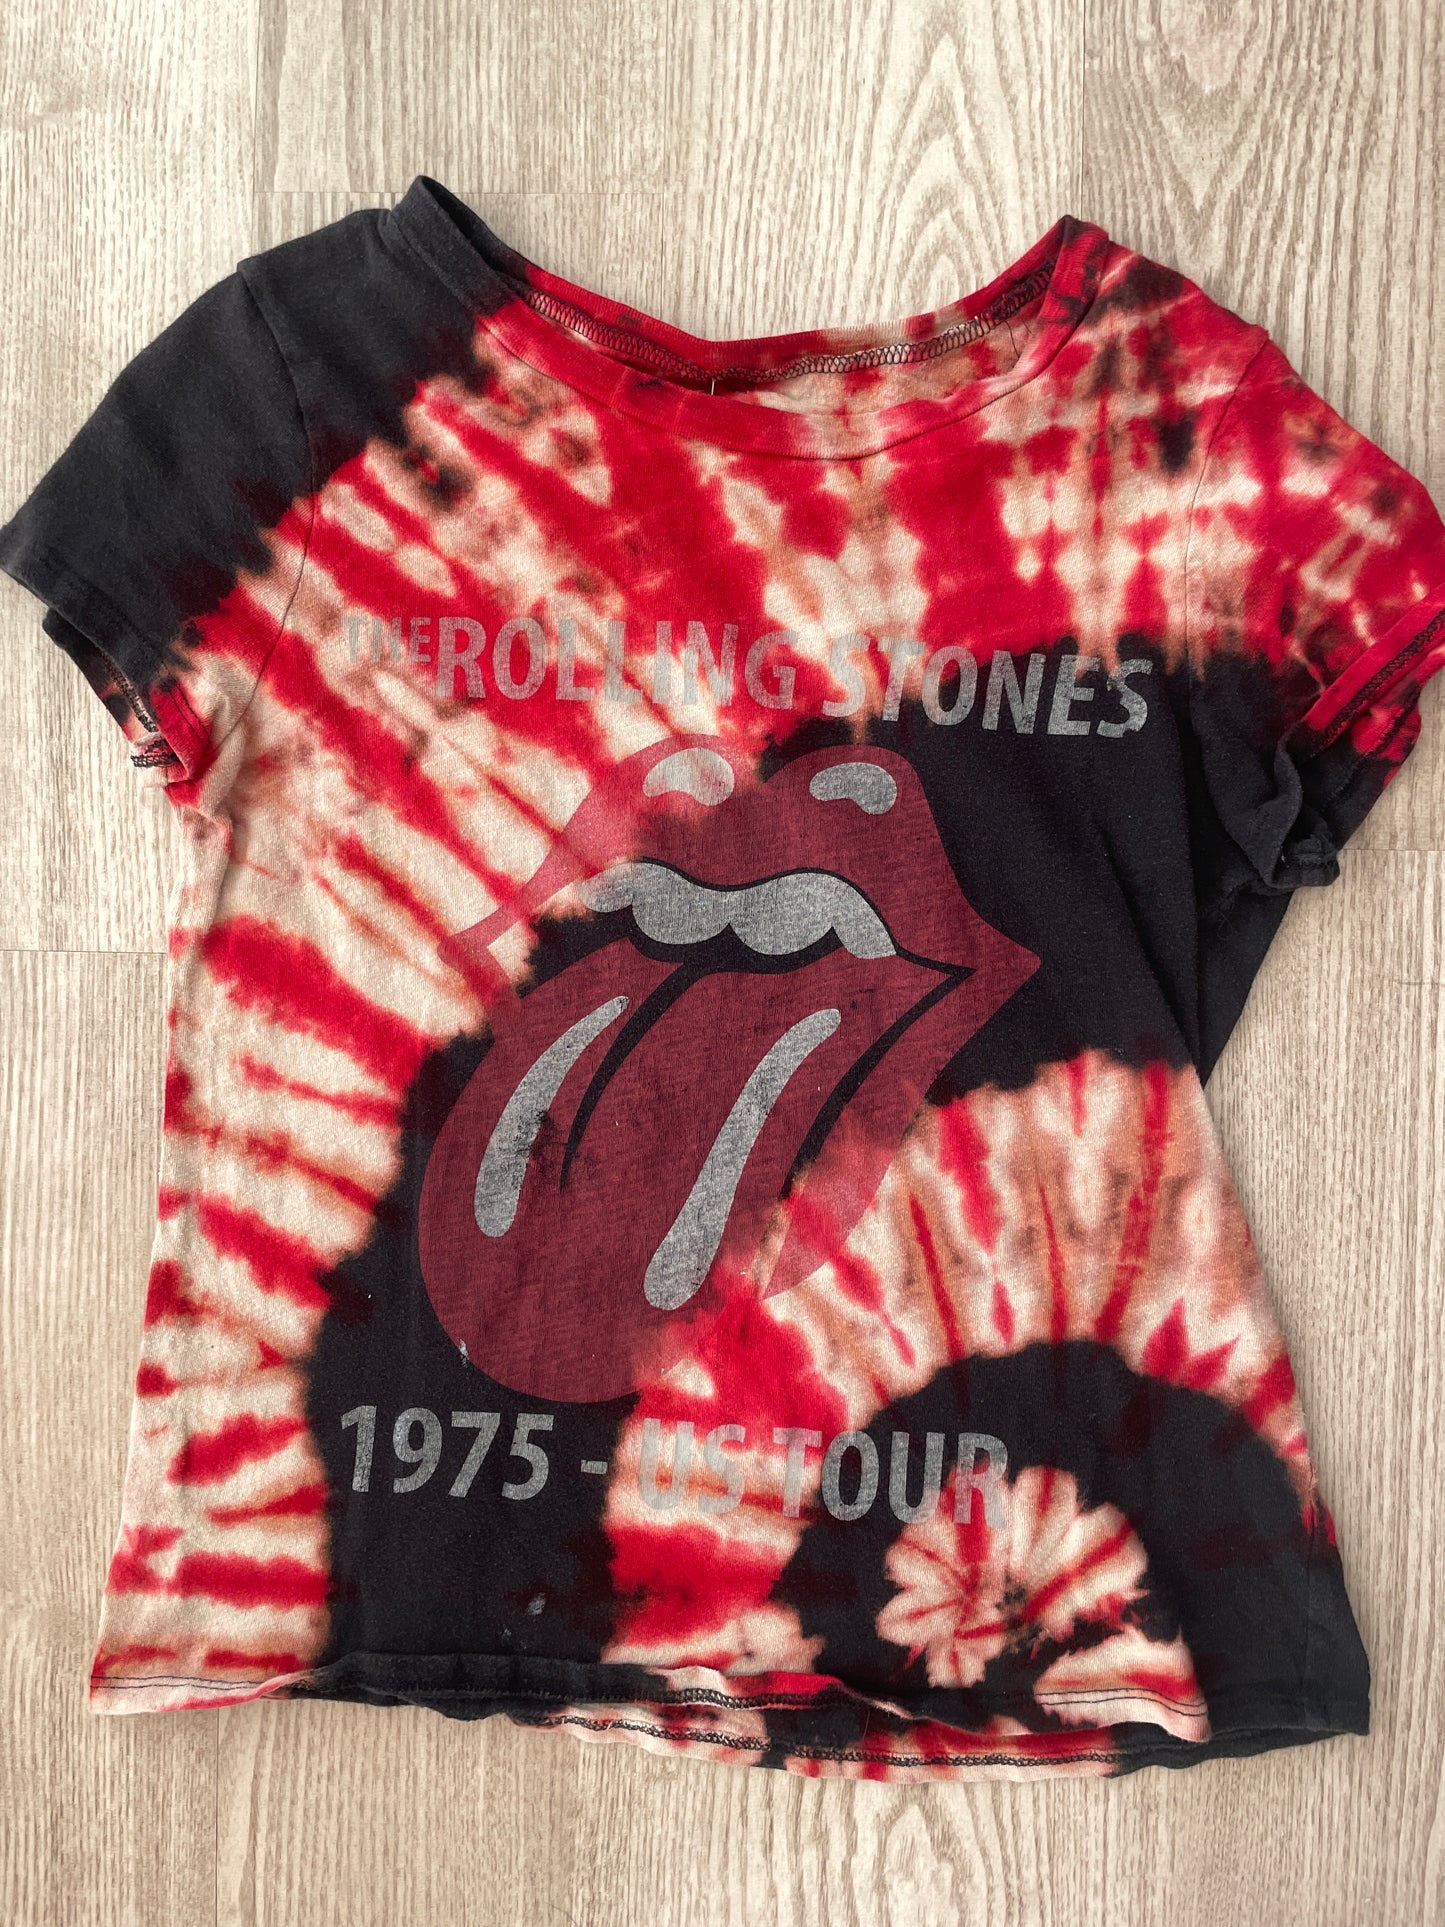 SMALL Women's Rolling Stones Handmade Reverse Tie Dye Short Sleeve T-Shirt | One-Of-a-Kind Upcycled Red and Black Spiral Top